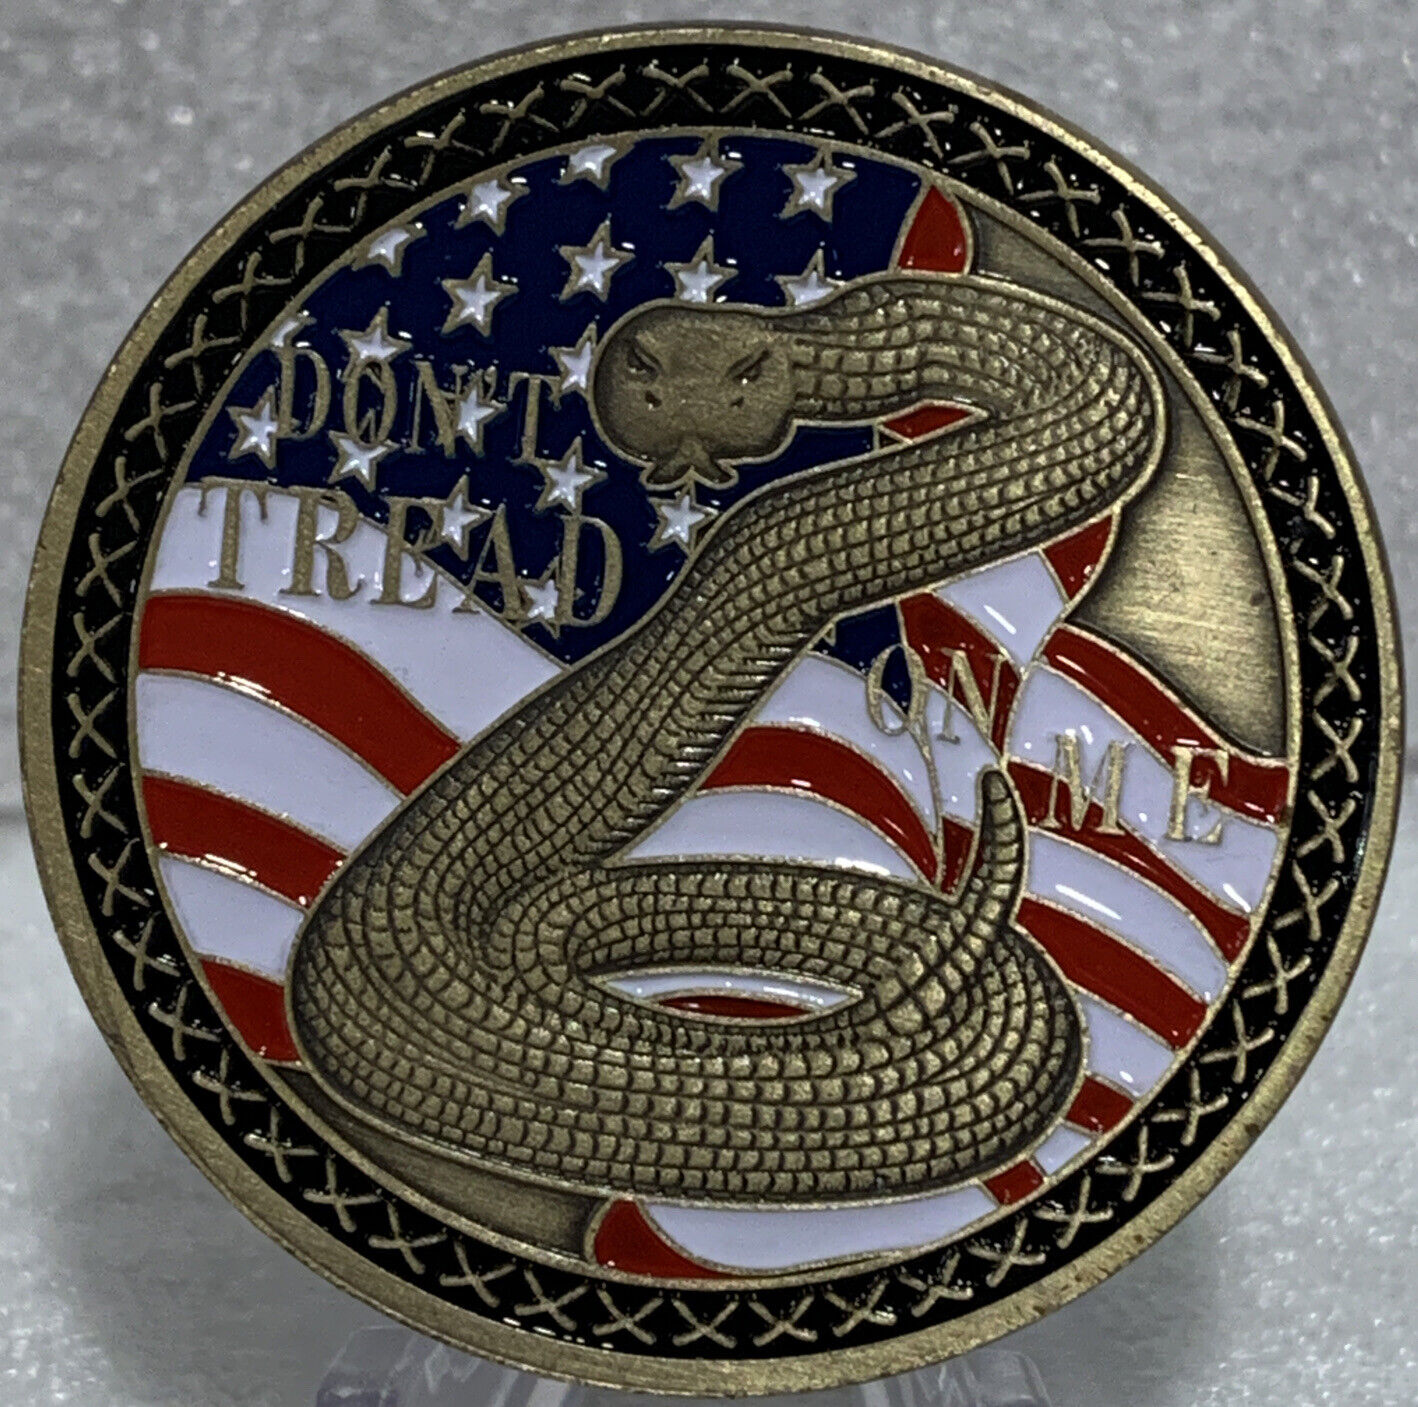 * Don\'t Tread on Me Challenge Coin - Collectible Challenge Coin. 2nd Amendment